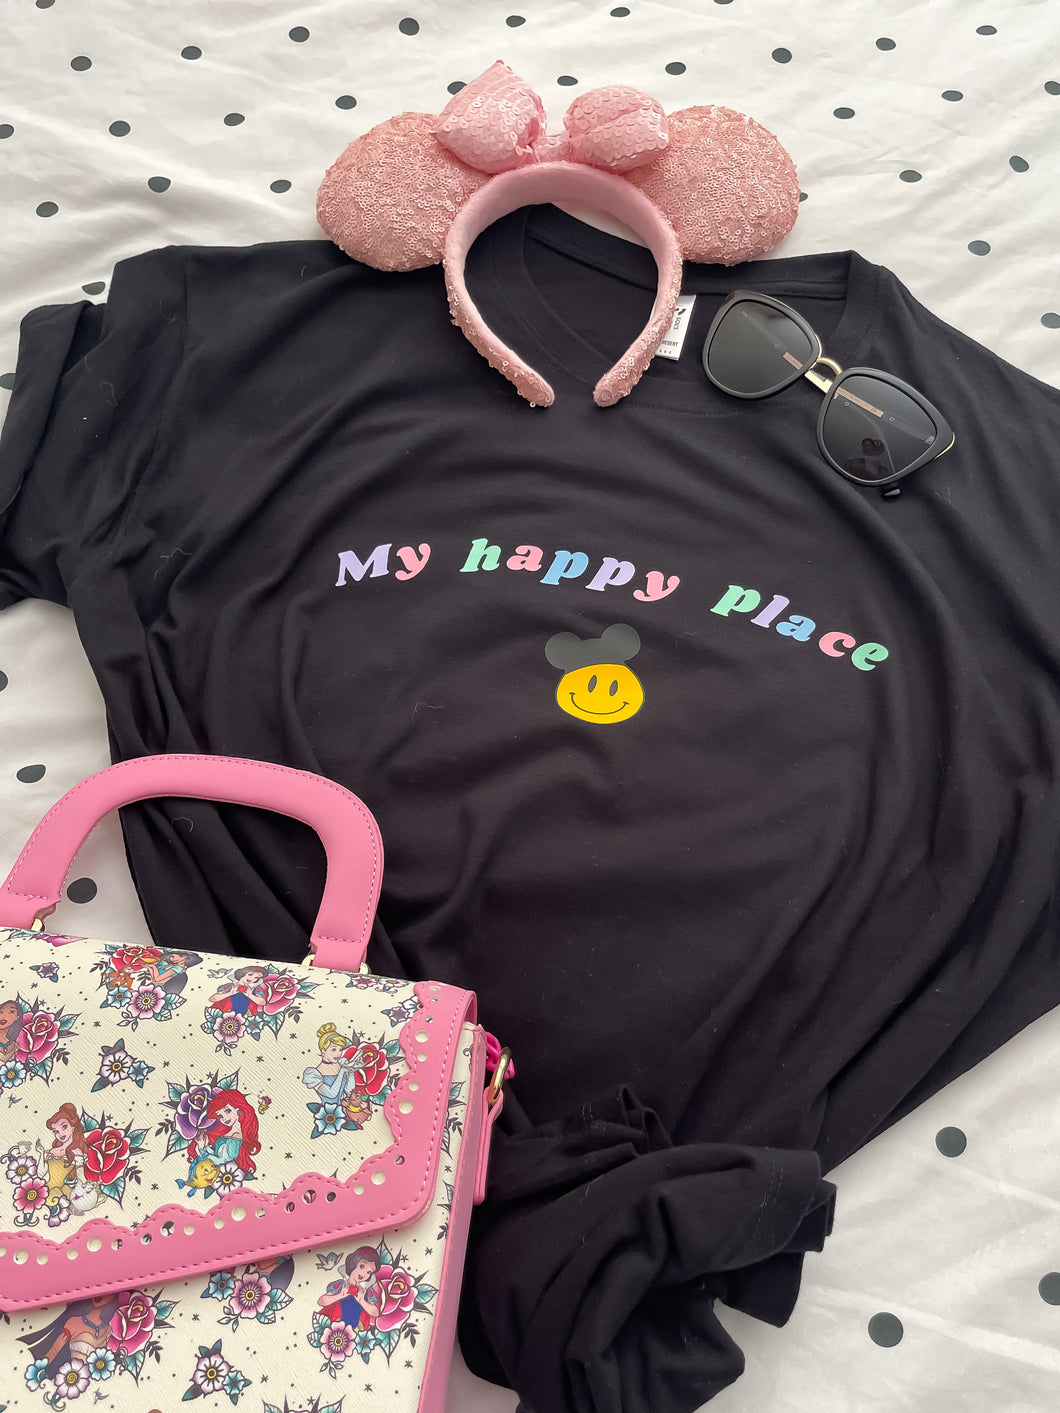 My happy place smiley face T-Shirt Unisex All Sizes